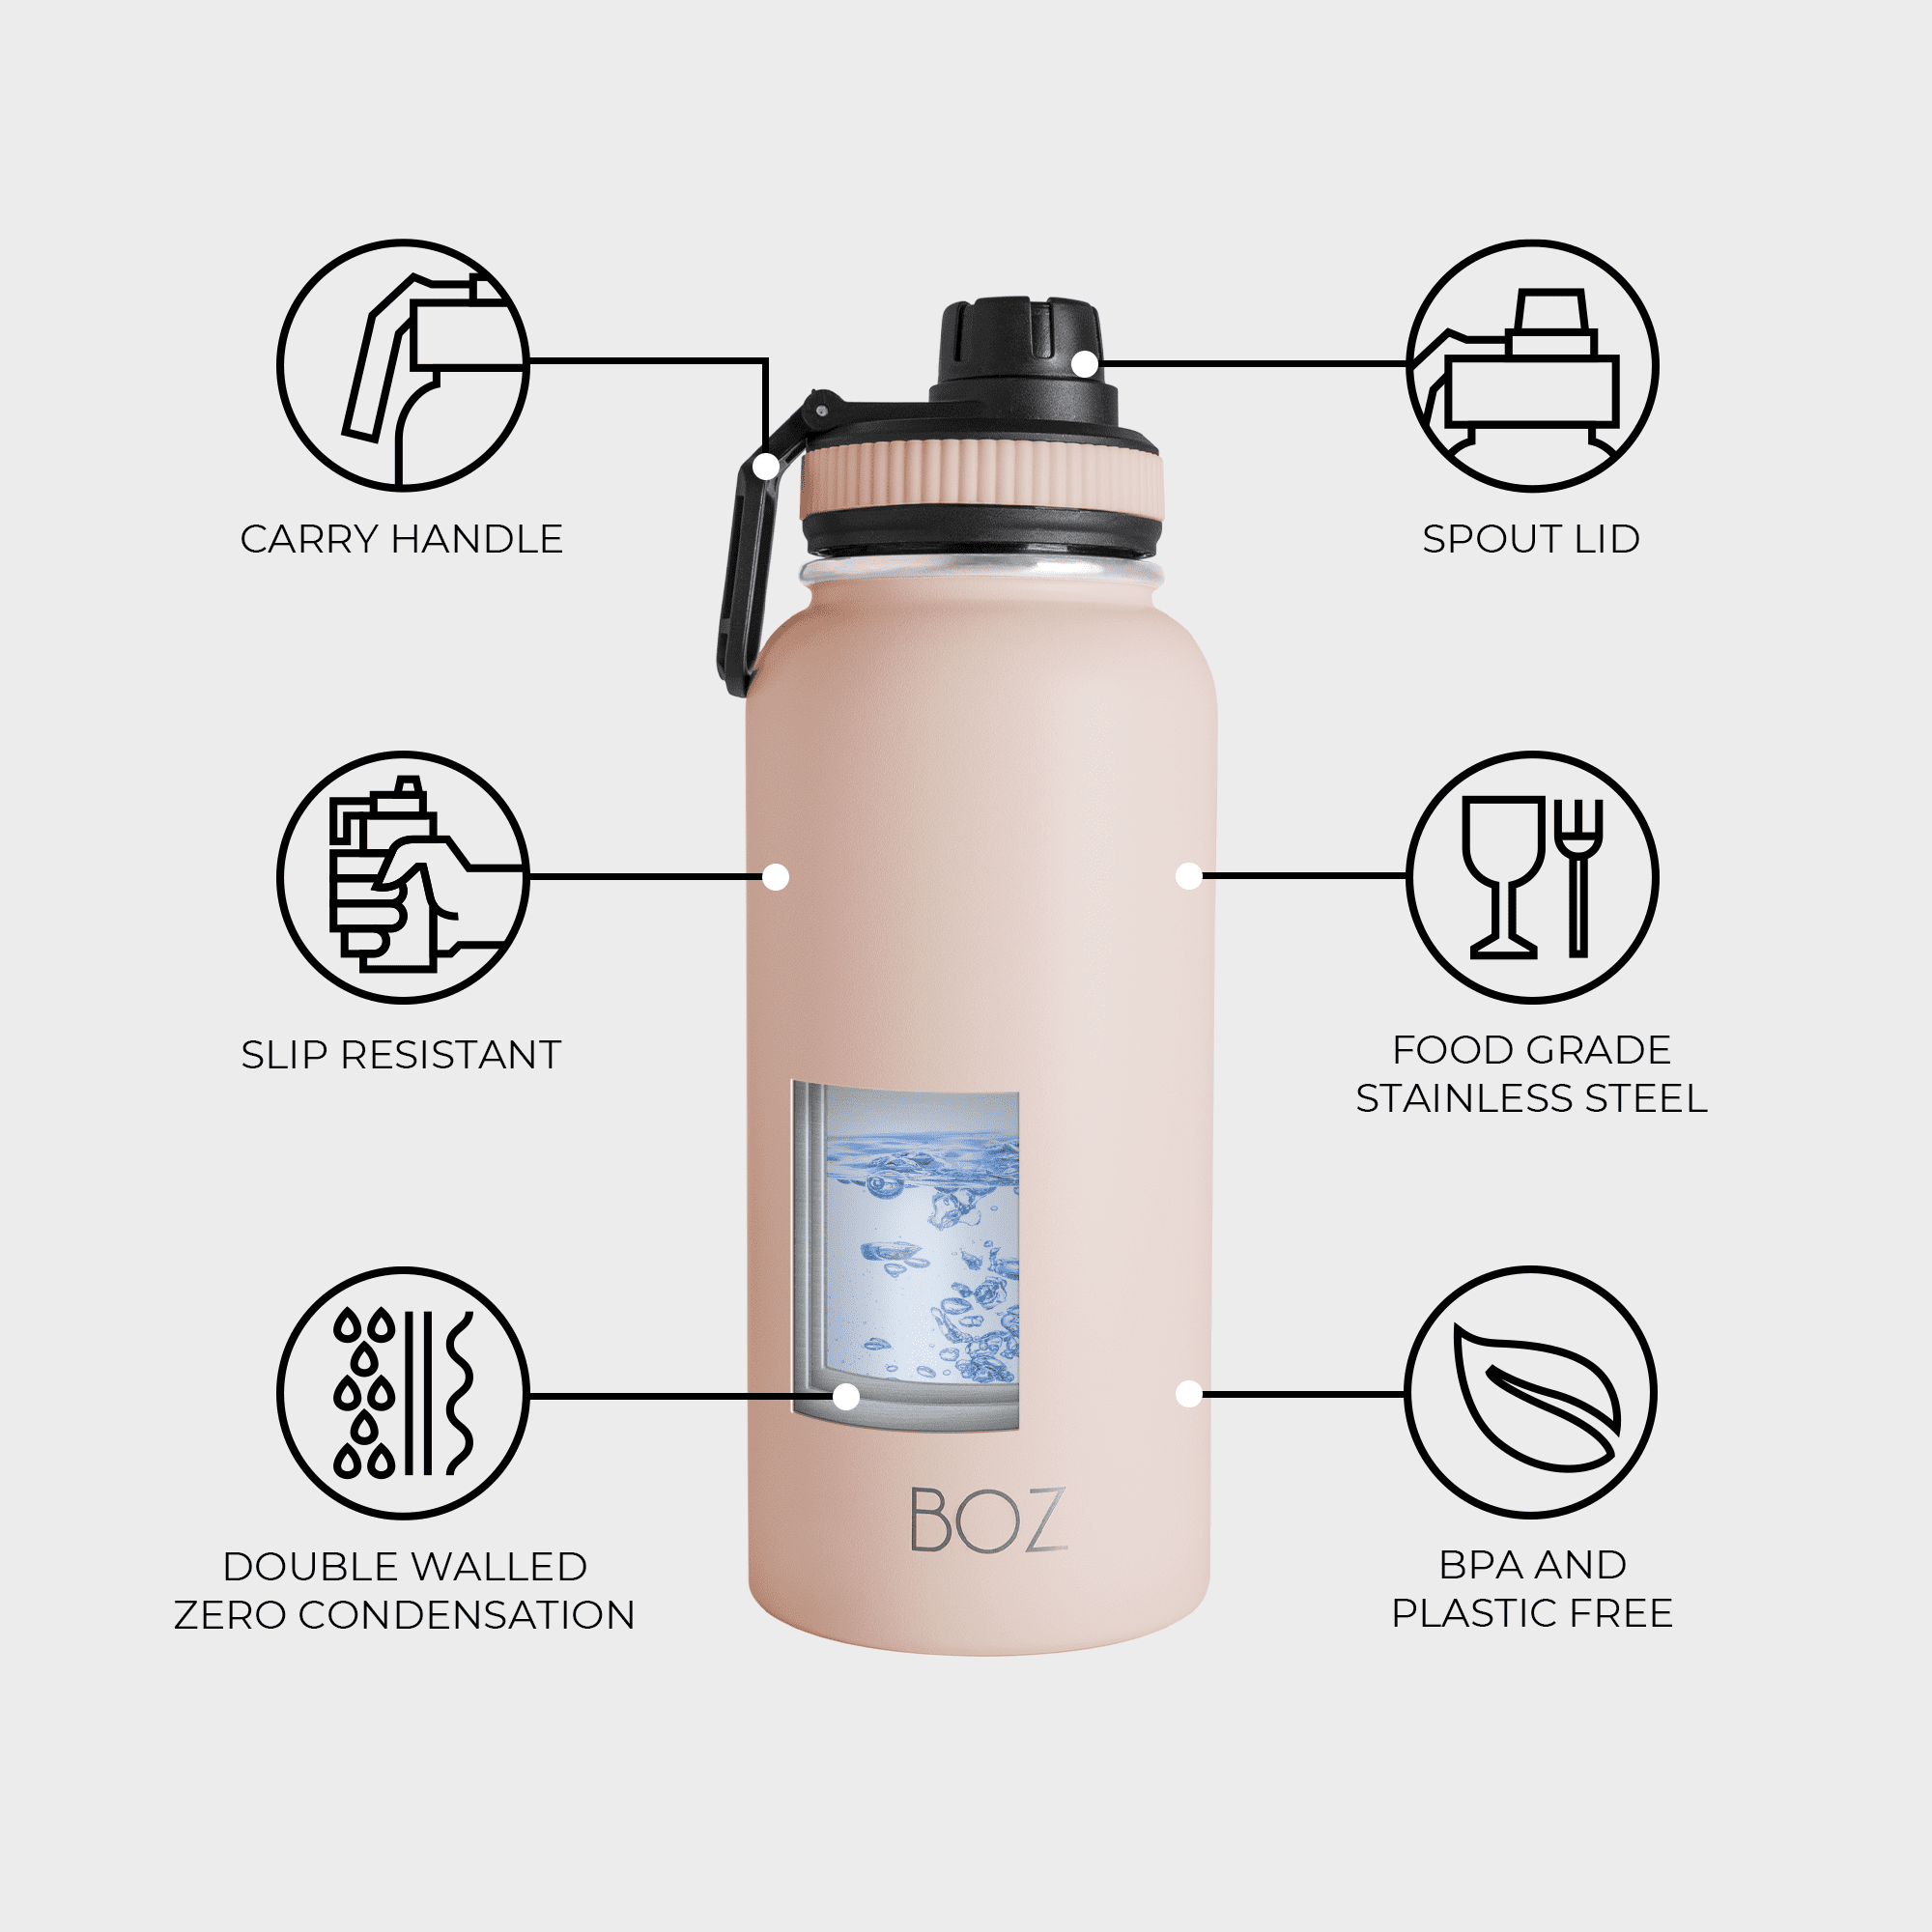 Milifox 12 oz Insulated Water Bottle, Double Wall Vacuum Insulated  Stainless Steel Water Bottles - Wide Mouth Leakproof BPA Free Water Bottle  with